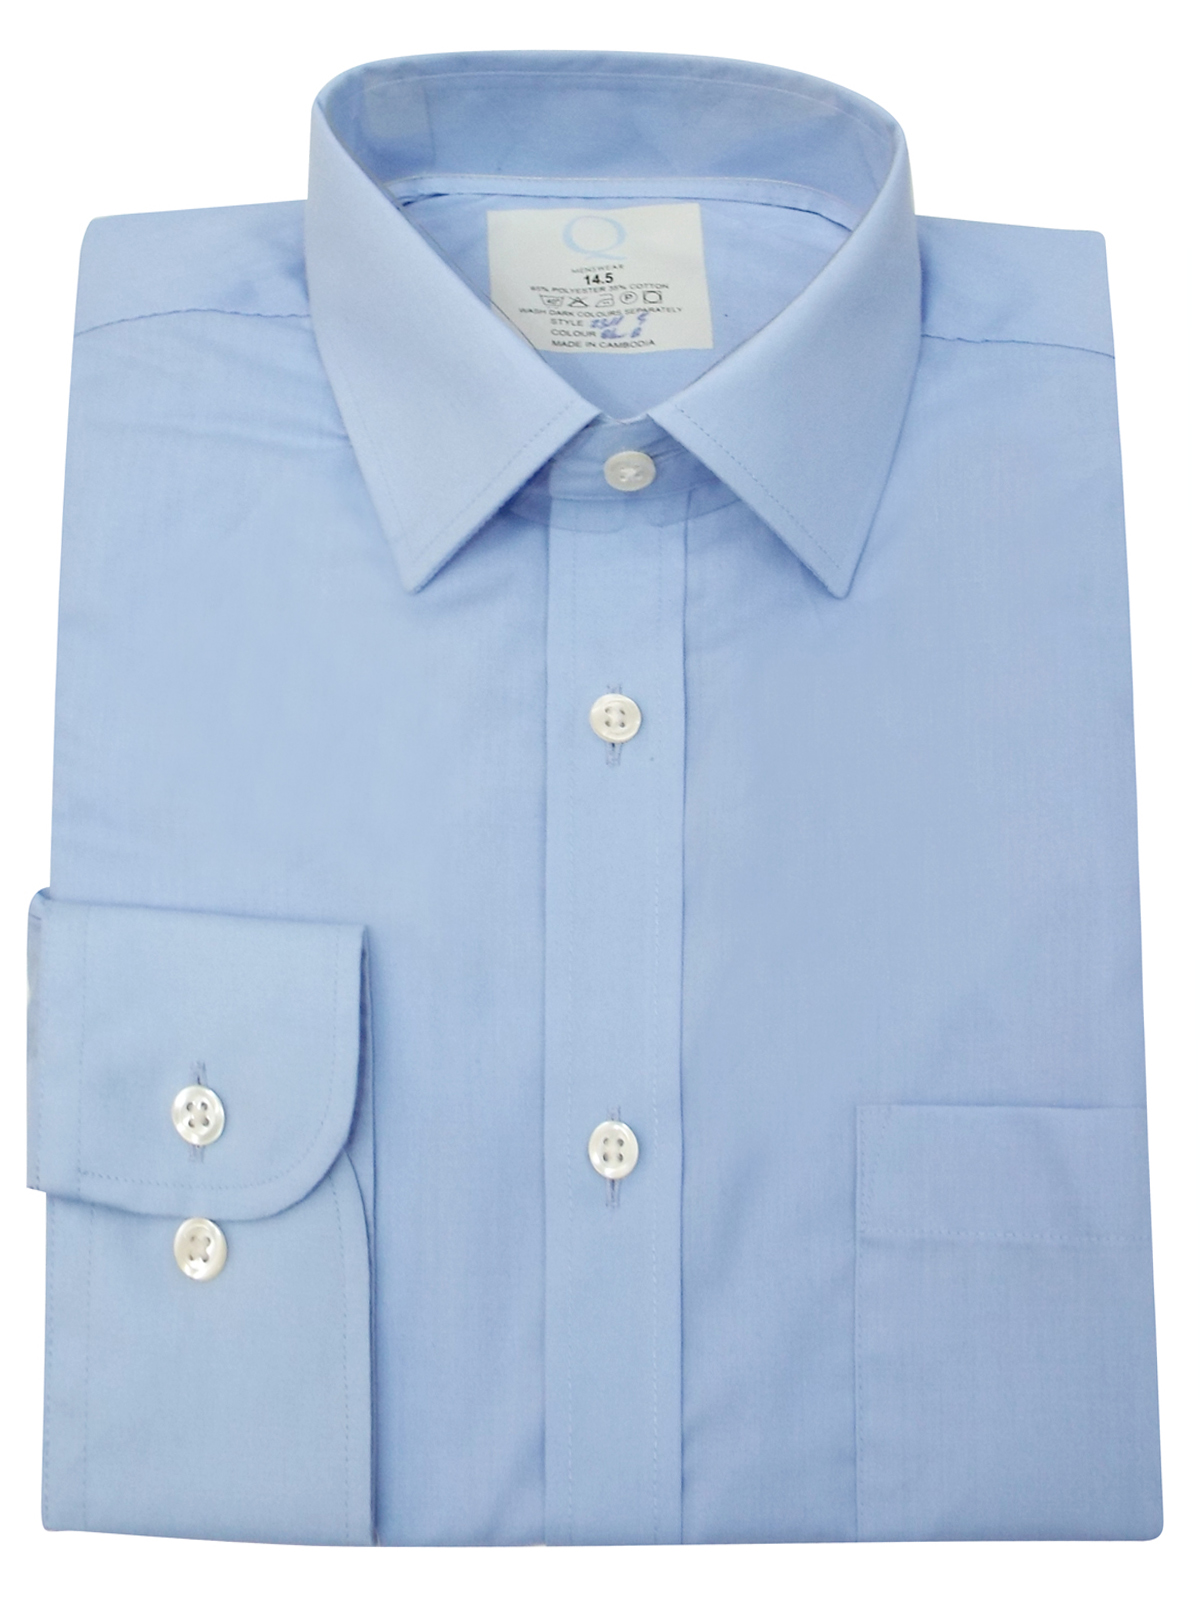 Marks and Spencer - - M&5 ASSORTED Cotton Blend Long Sleeve Shirt ...